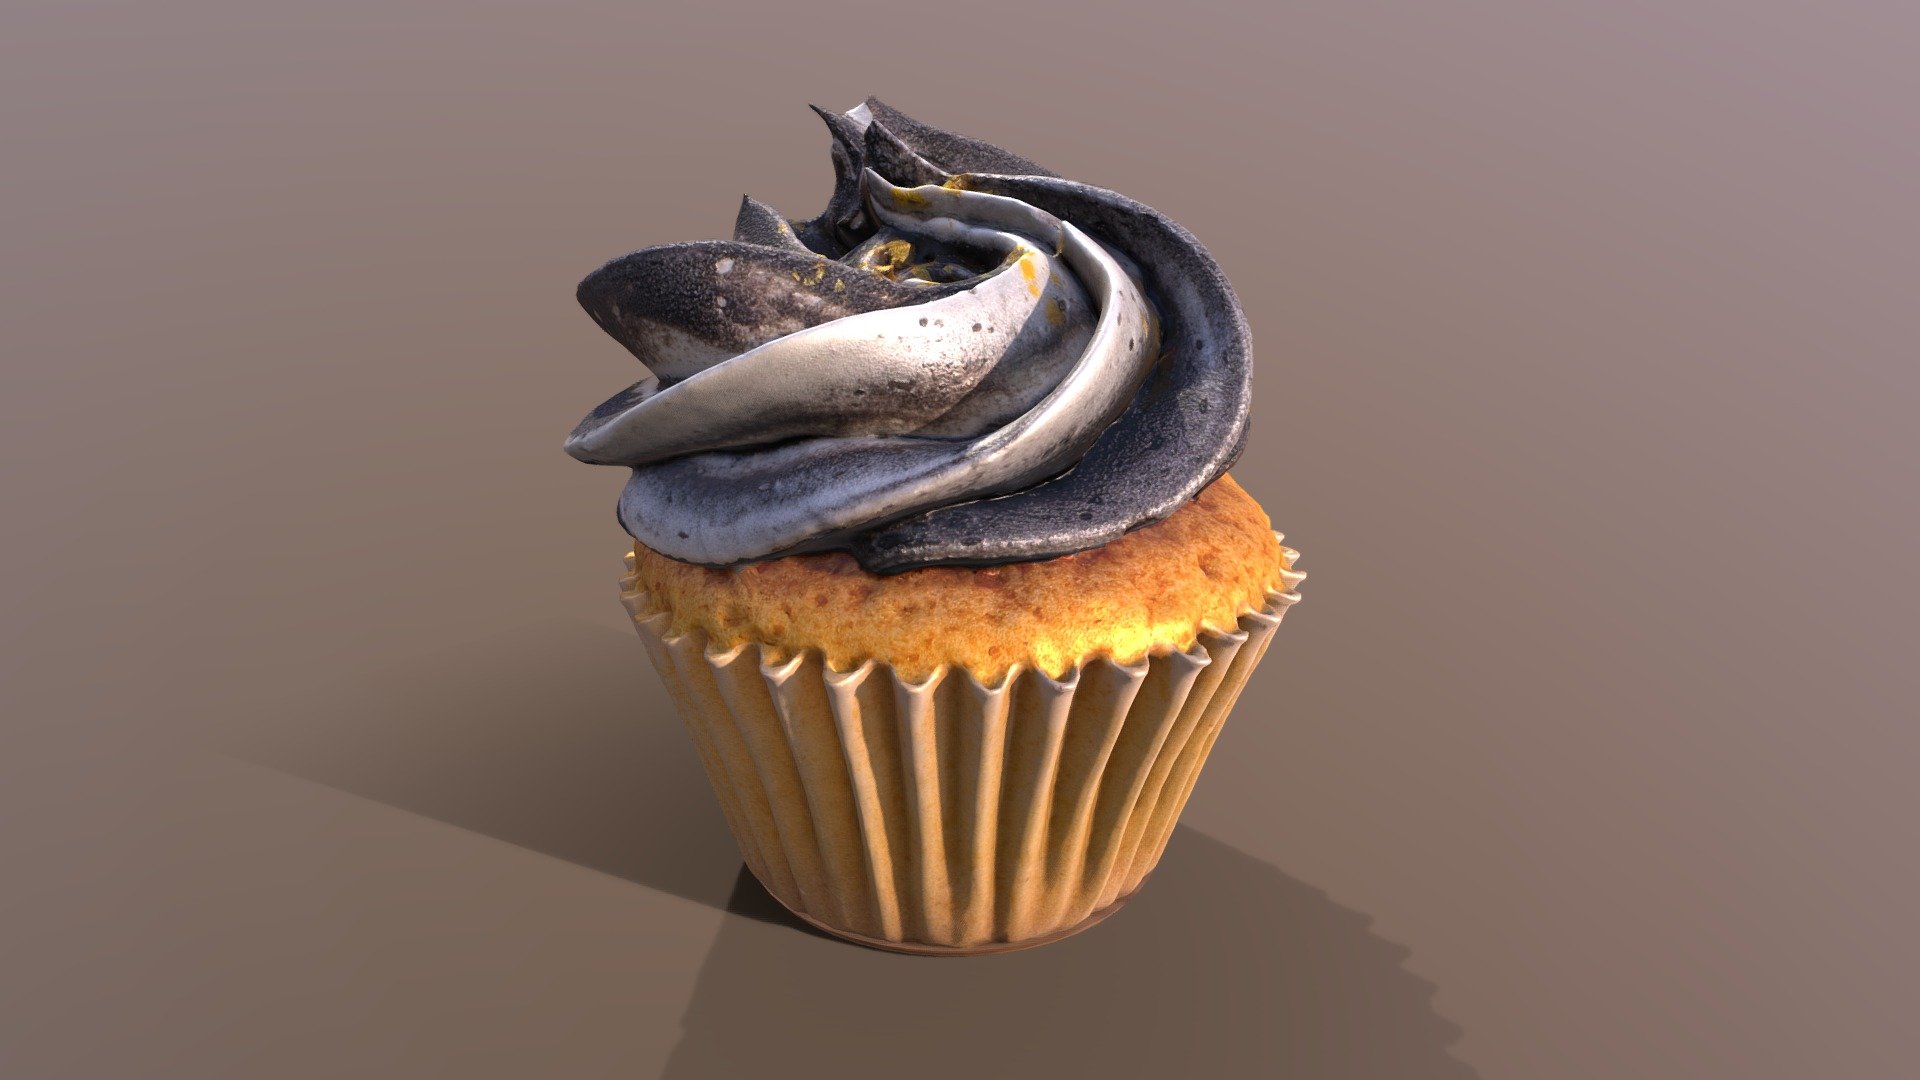 This elegant Golden Flakes Cupcake model was created using photogrammetry which is made by CAKESBURG Premium Cake Shop in the UK. You can purchase real cake from this link: https://cakesburg.co.uk/products/premium-plain-silk-road-cupcake-box?_pos=19&amp;_sid=e5fef477b&amp;_ss=r

Textures 4096*4096px PBR photoscan-based materials Base Color, Normal, Roughness, Specular) - Elegant Golden Flakes Cupcake - Buy Royalty Free 3D model by Cakesburg Premium 3D Cake Shop (@Viscom_Cakesburg) 3d model